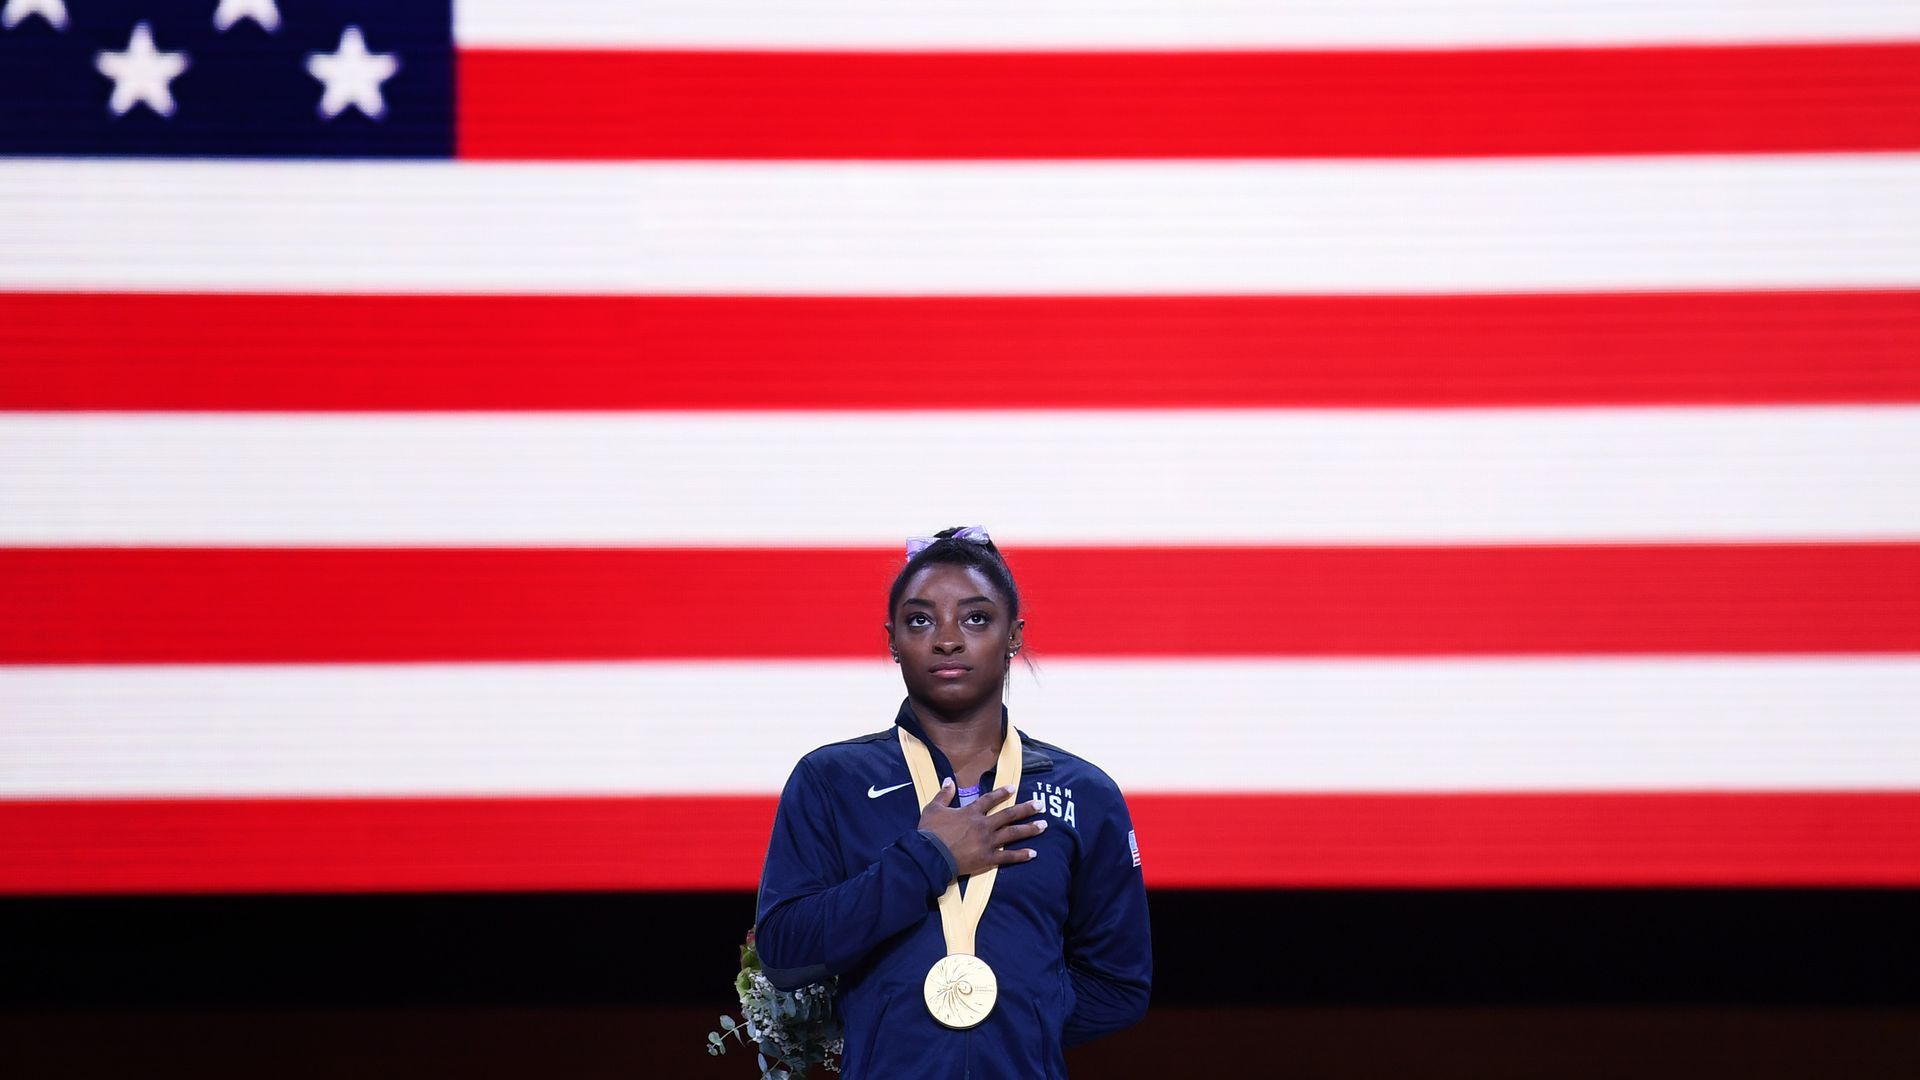 Simone Biles in front of an American flag